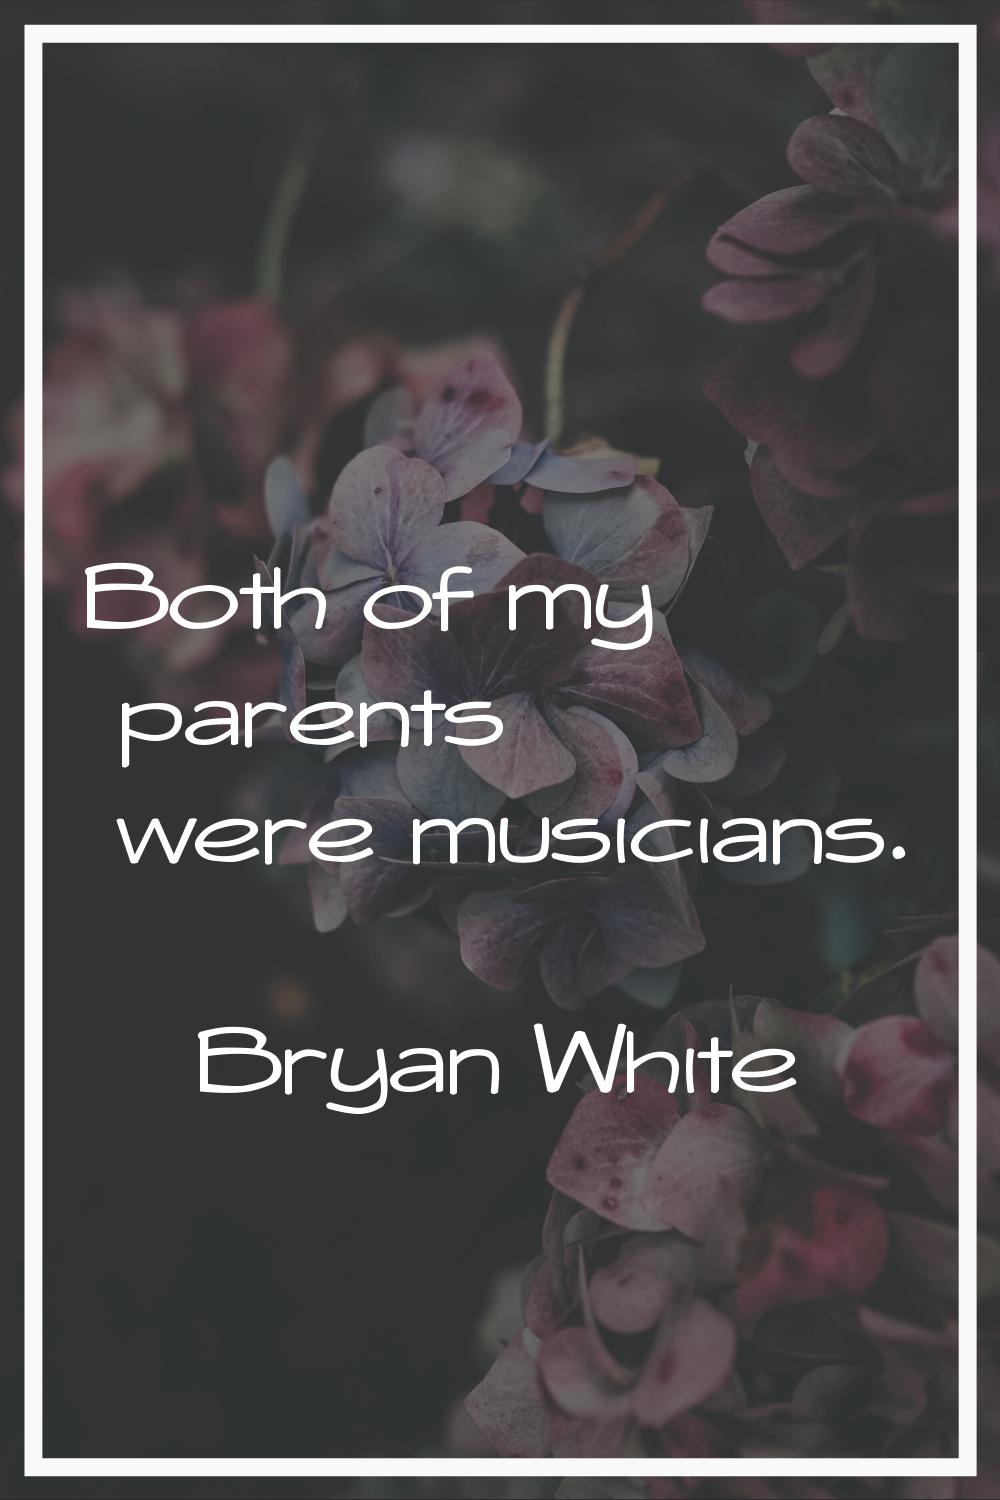 Both of my parents were musicians.